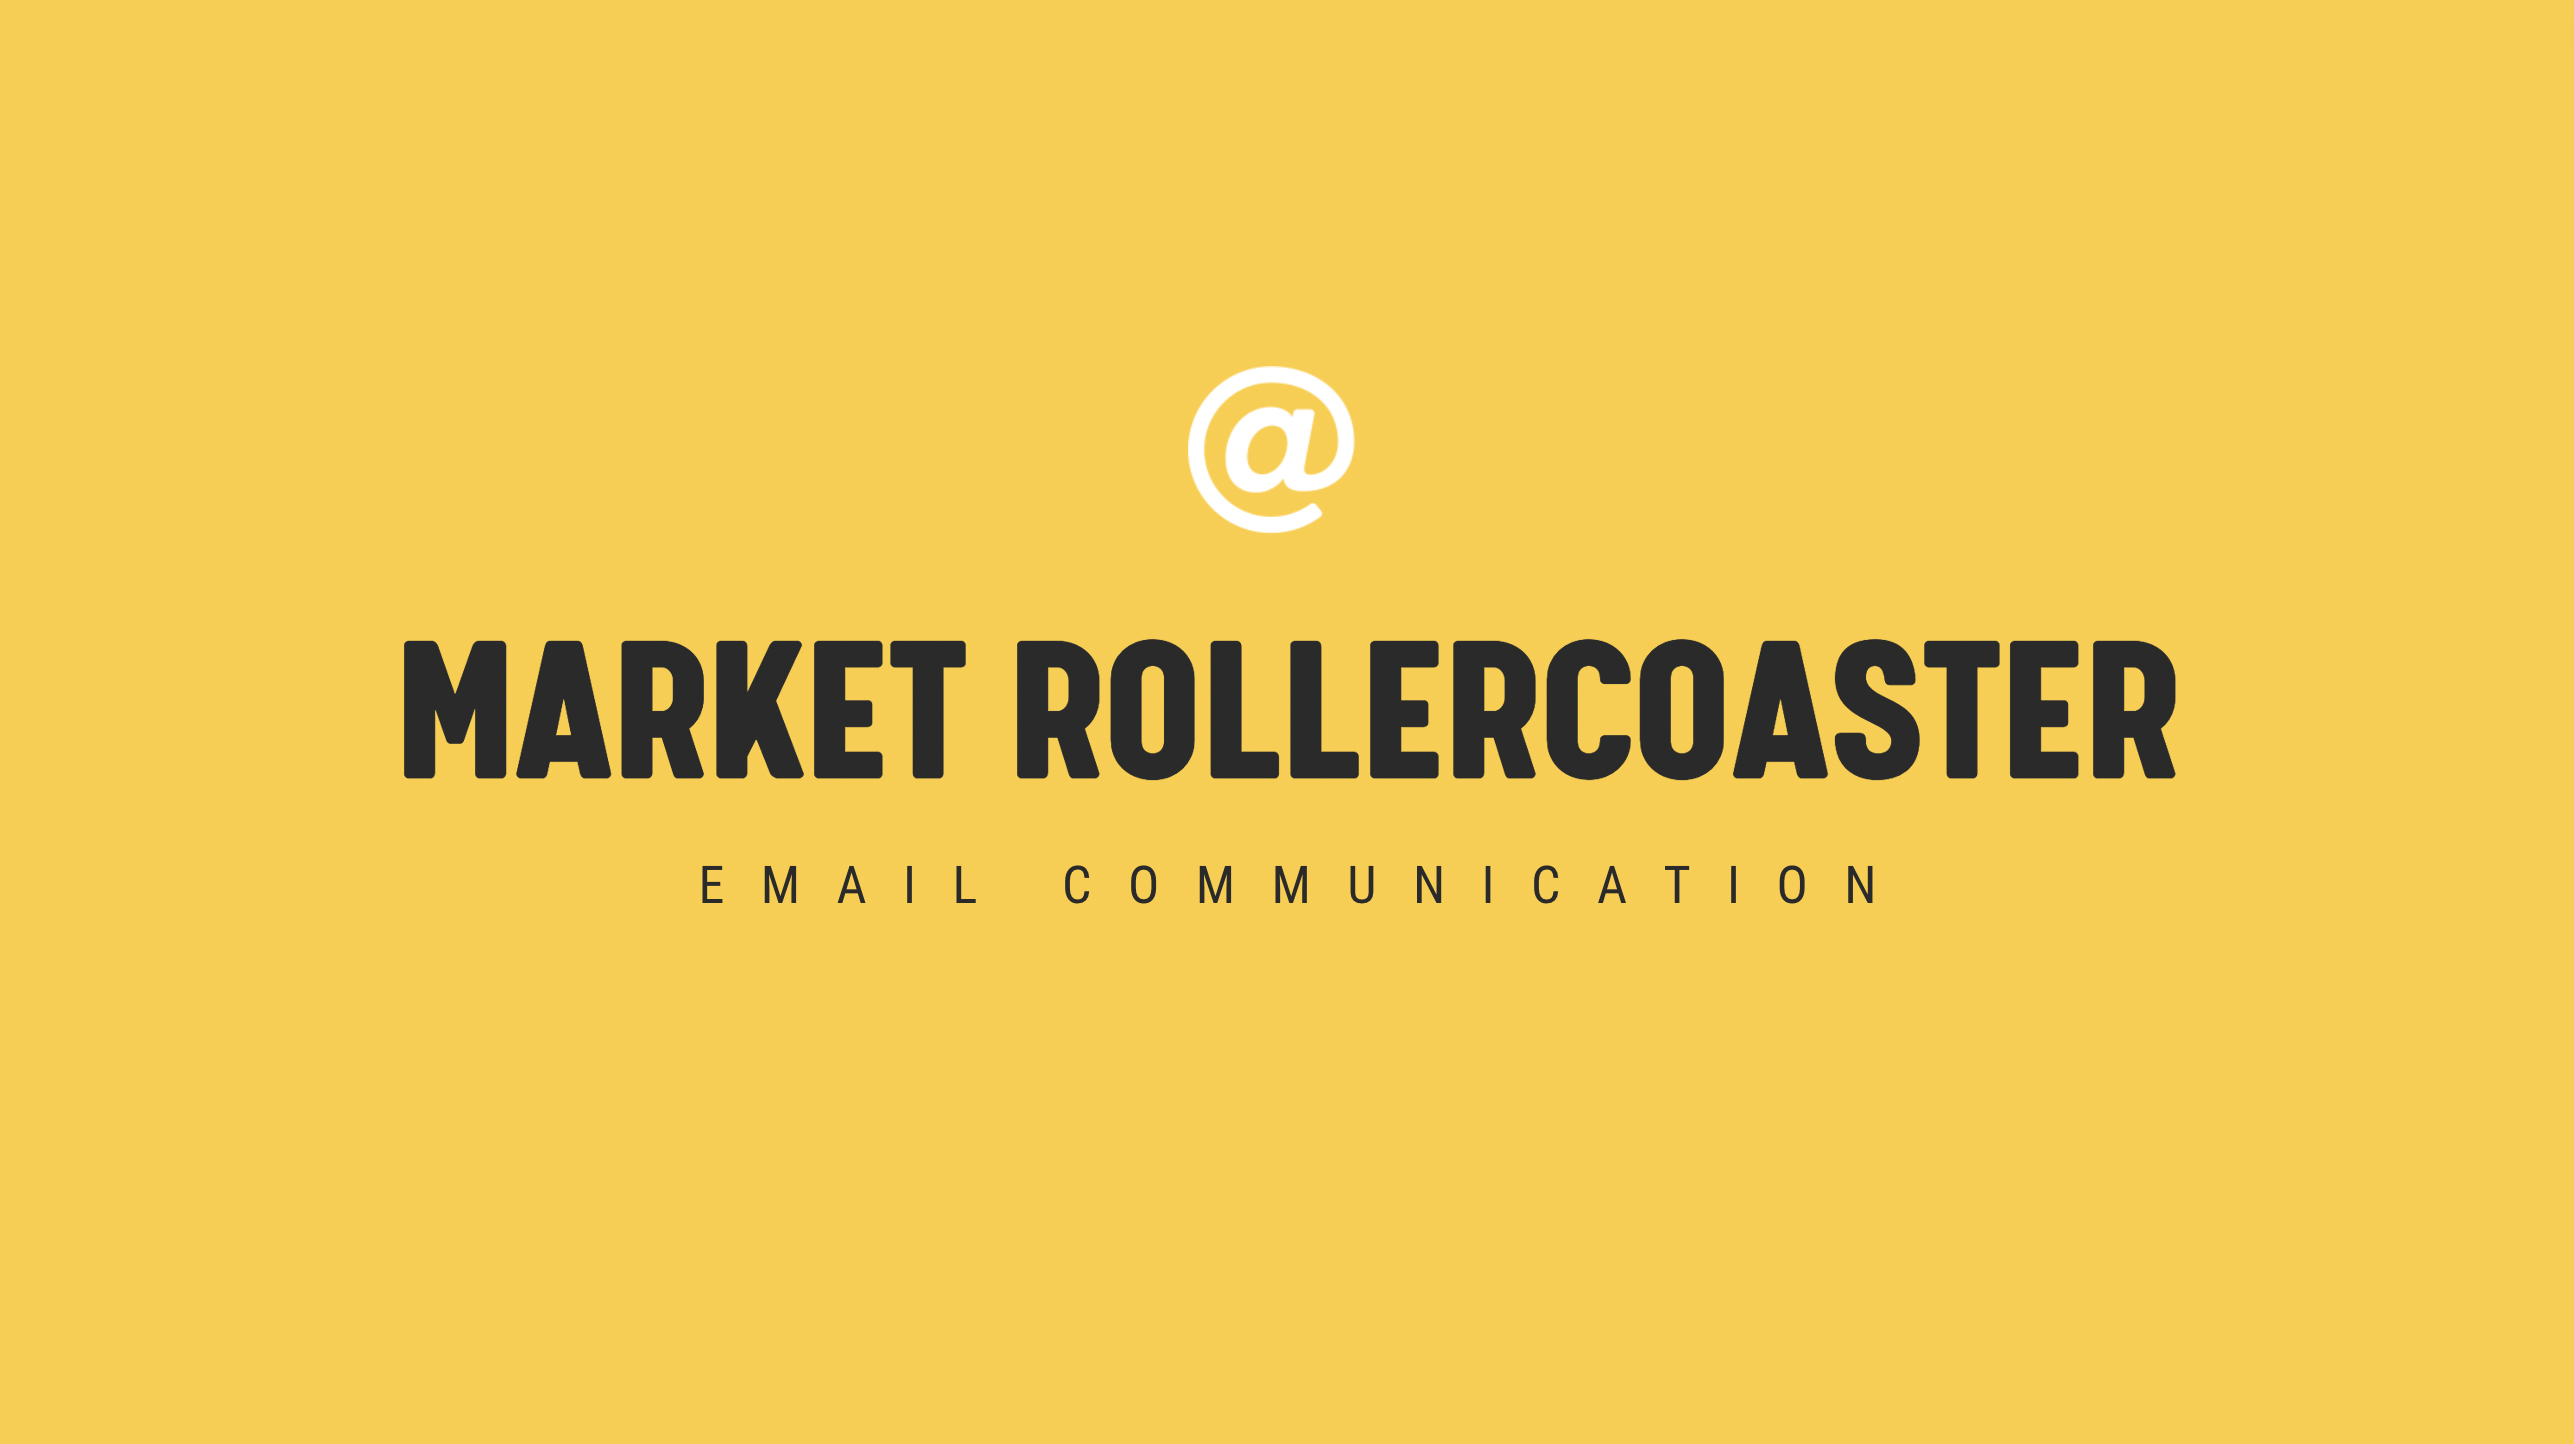 [NEW] Market Rollercoaster - Timely Email